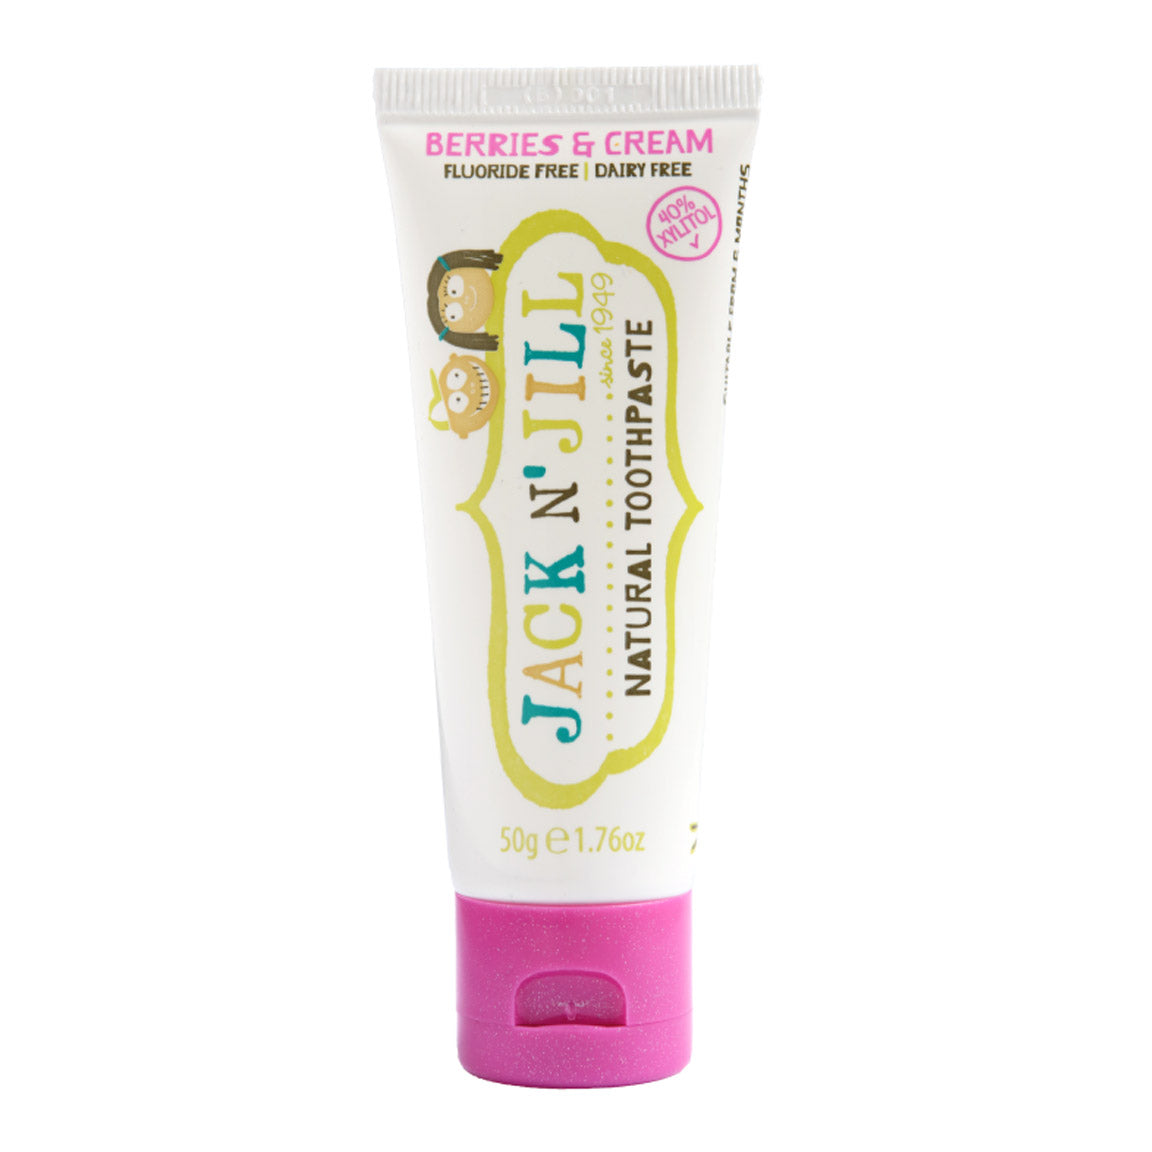 Natural Toothpaste - Berries & Cream (50g)